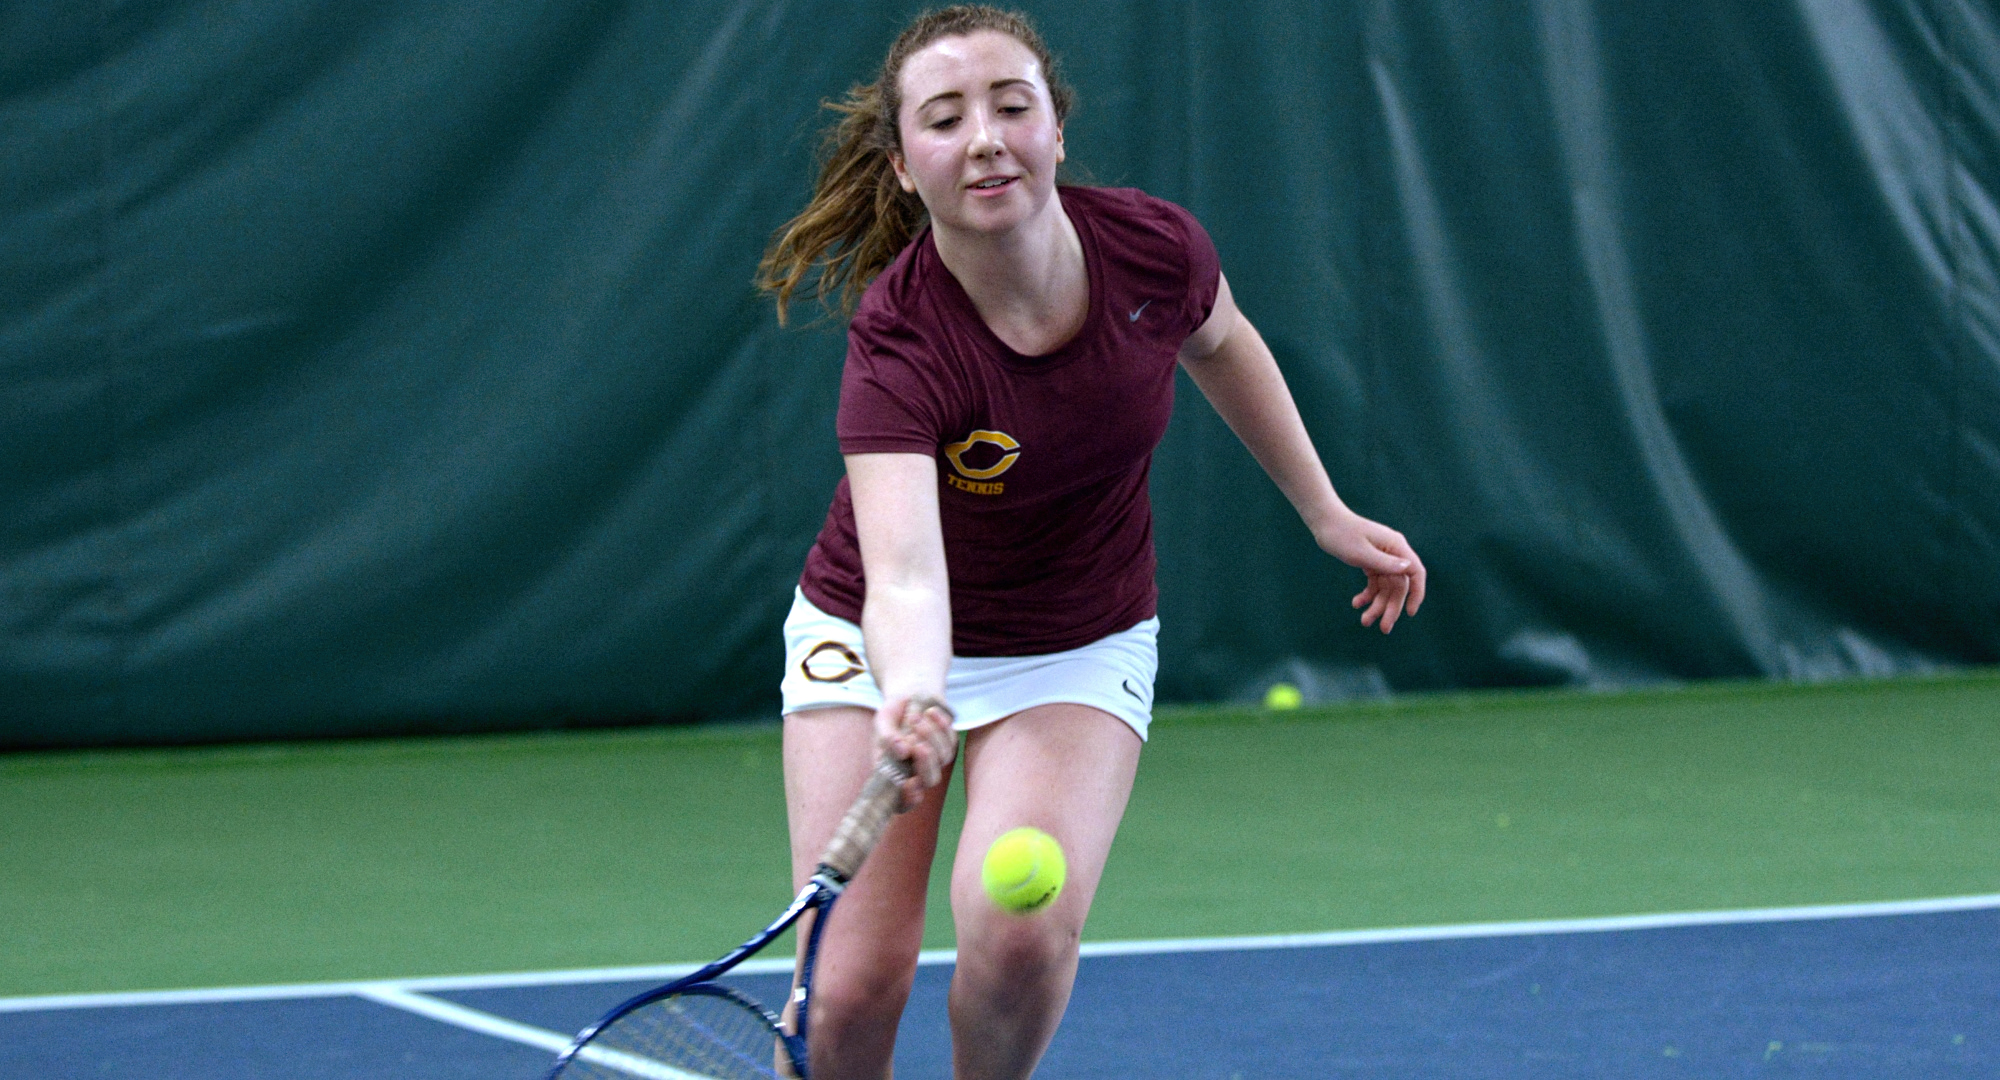 Freshman Talia Dalzell won her first collegiate singles match as she posted a 6-4, 5-7, 11-9 win in the Cobbers' match with Division II Bemidji State.